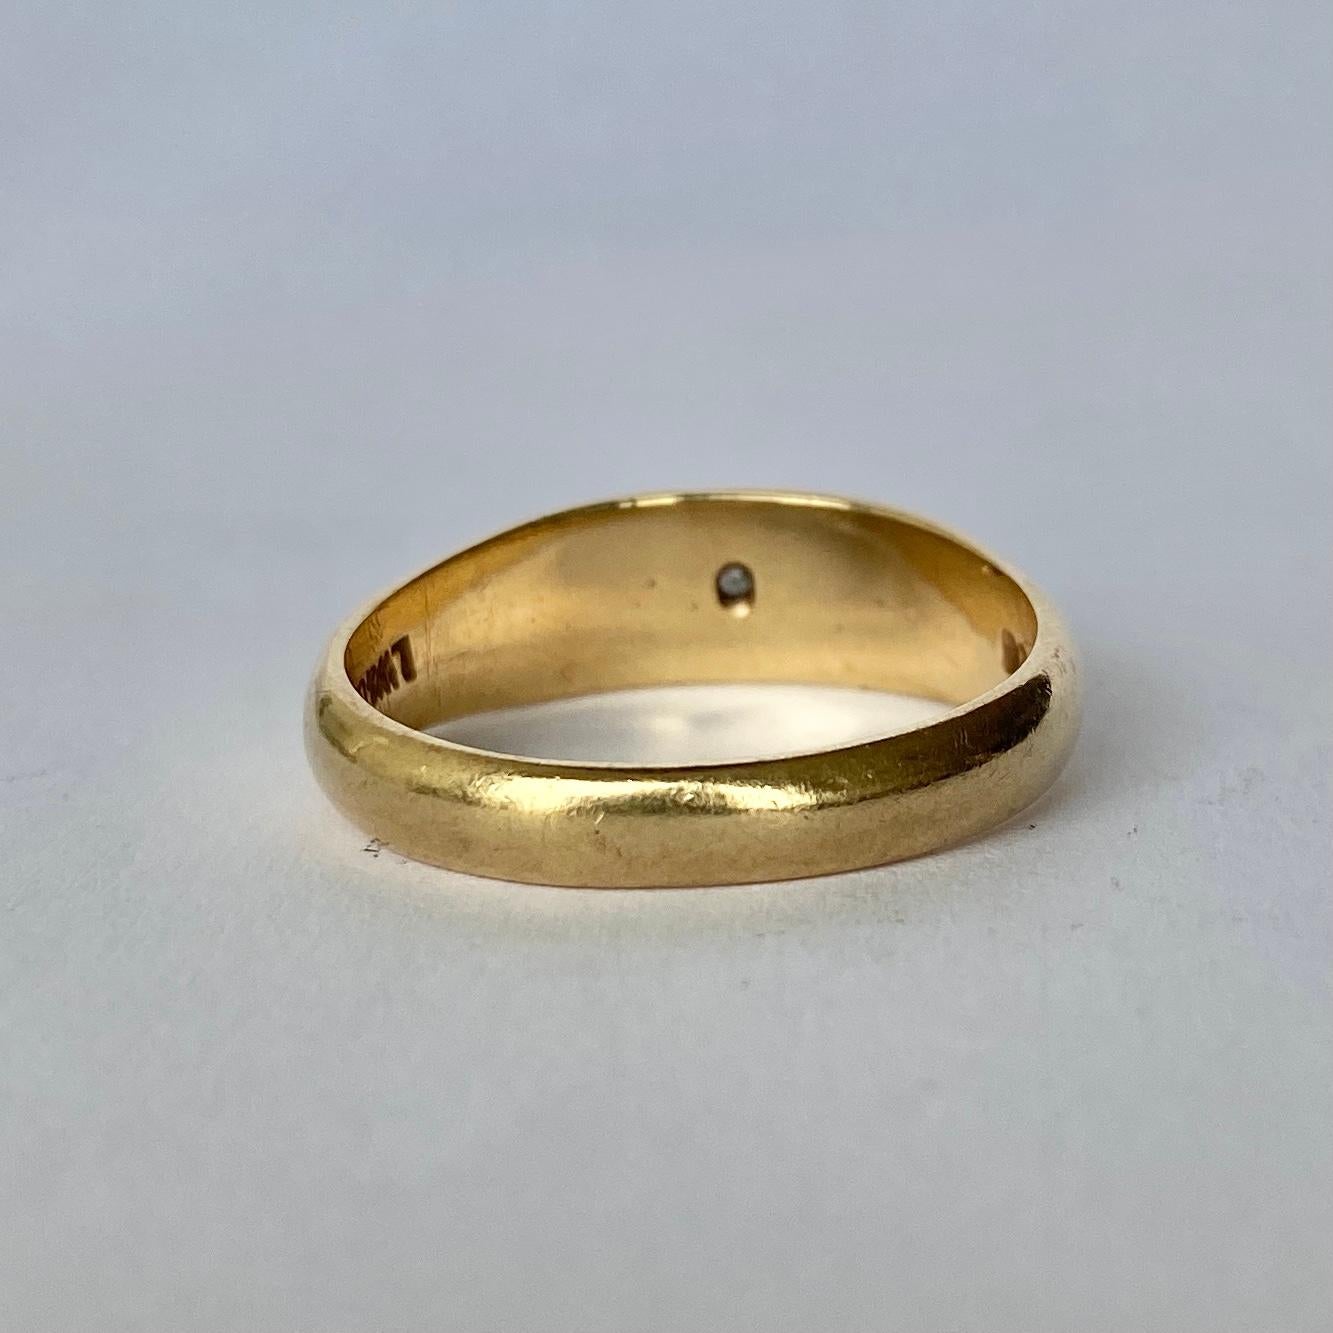 The lovely diamond in this simple band measures 10pts and adds a wonderful amount of sparkle to what would be a simple gold band. Modelled in 9 Carat gold. hallmarked London. 

Ring Size:U or 10
Band Width: 6mm

Weight: 5.99g